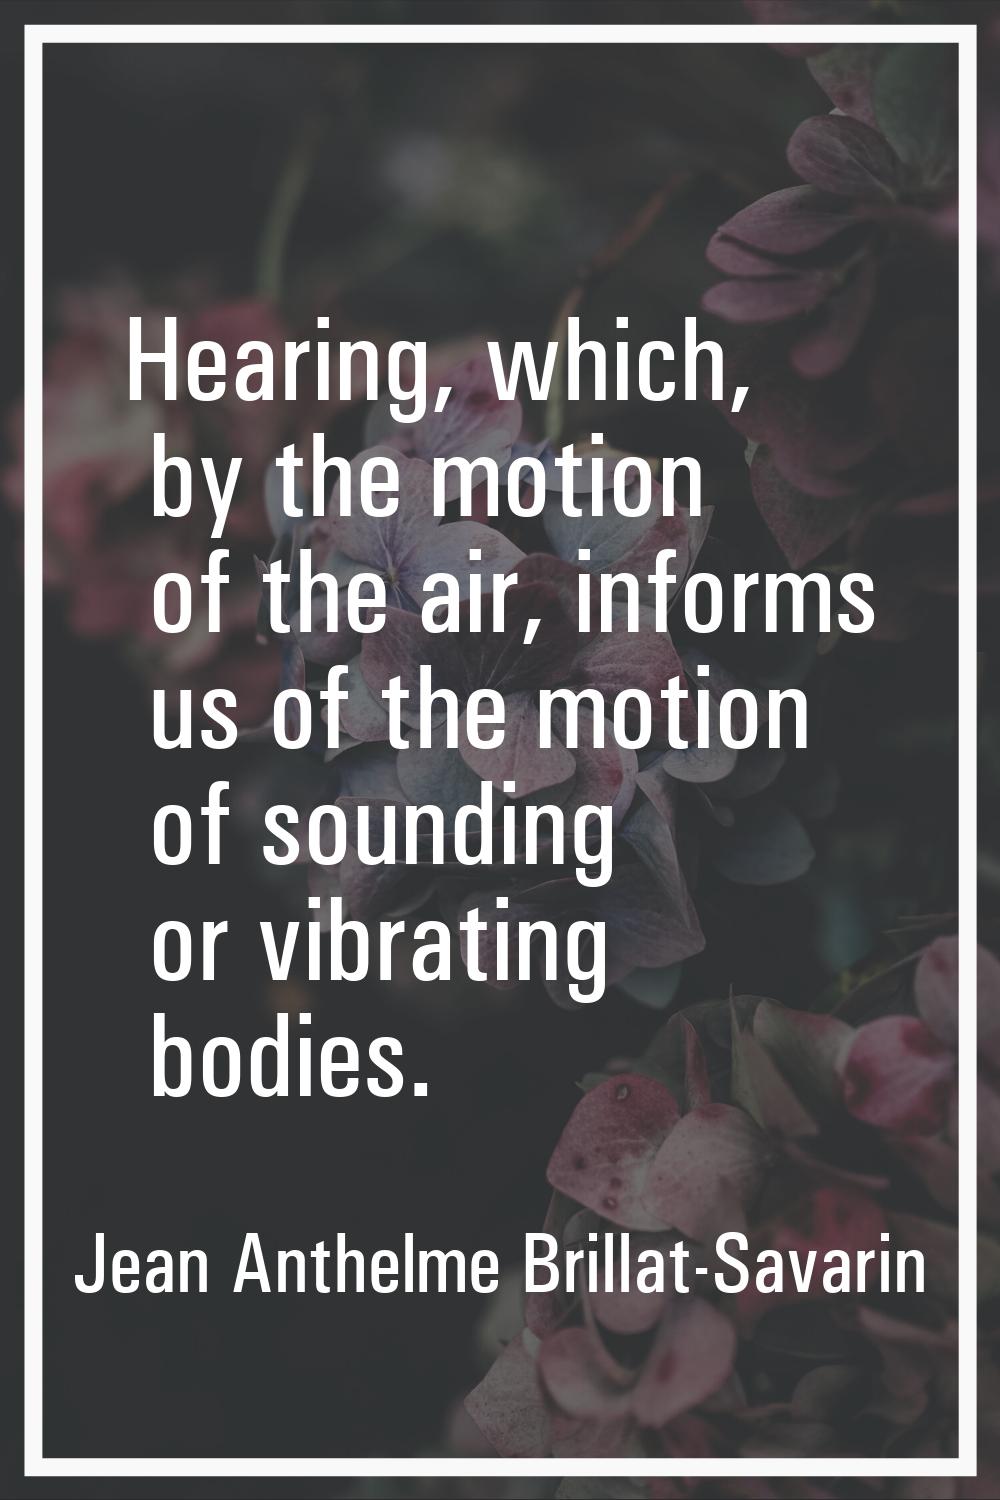 Hearing, which, by the motion of the air, informs us of the motion of sounding or vibrating bodies.